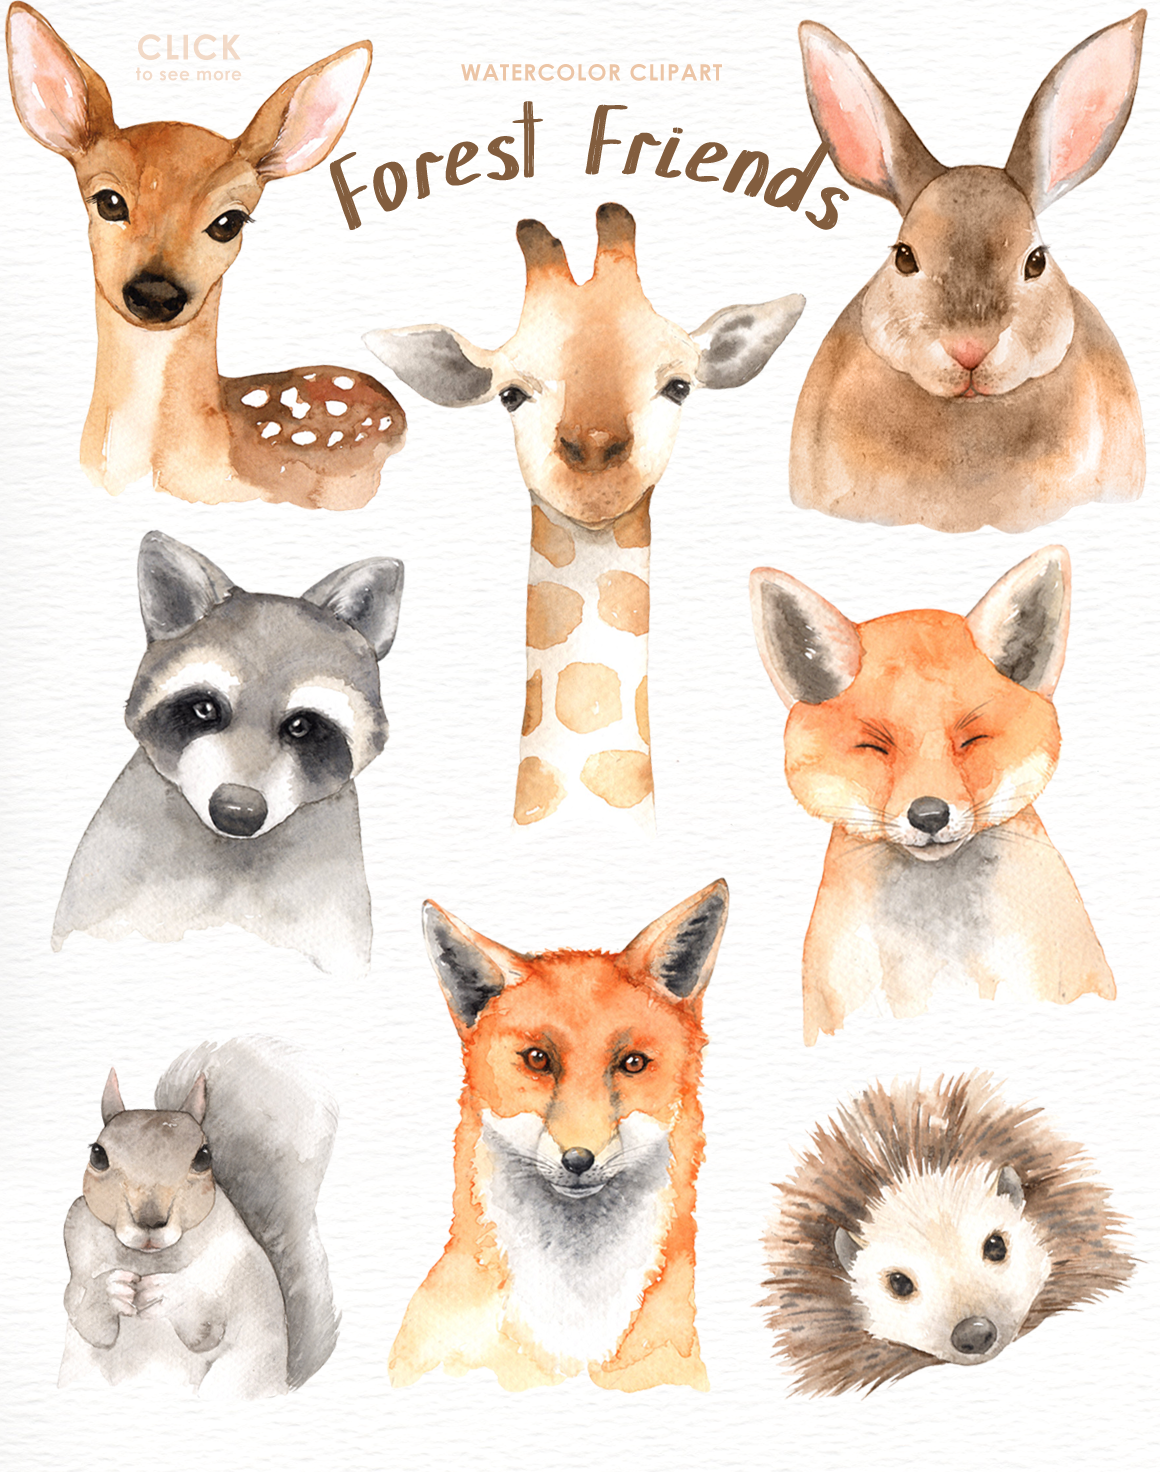 Download Forest Friends Watercolor Clip Art By everysunsun ...